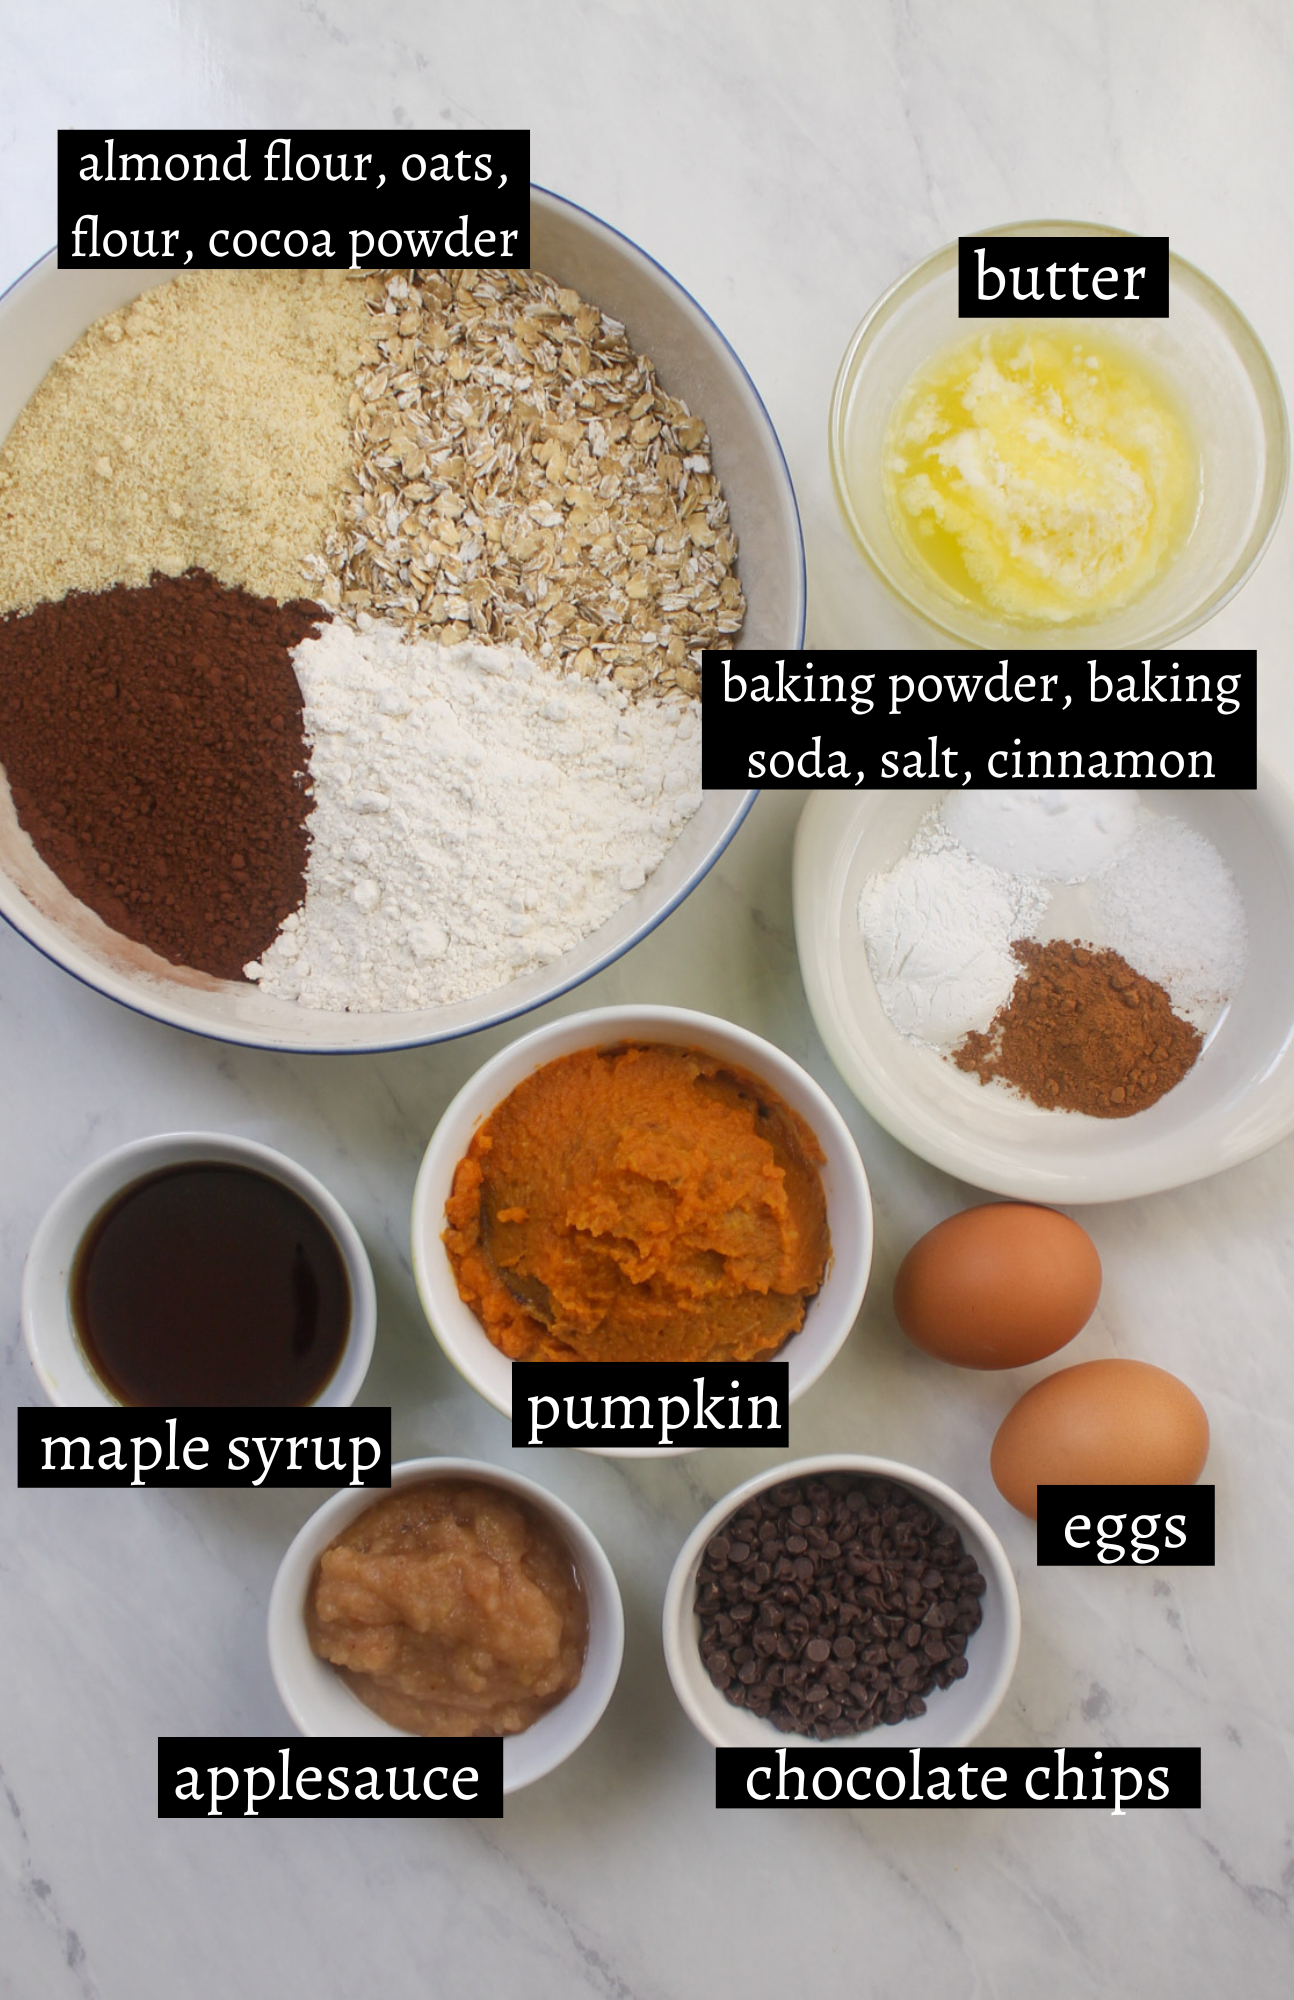 Labeled ingredients for chocolate pumpkin muffins.